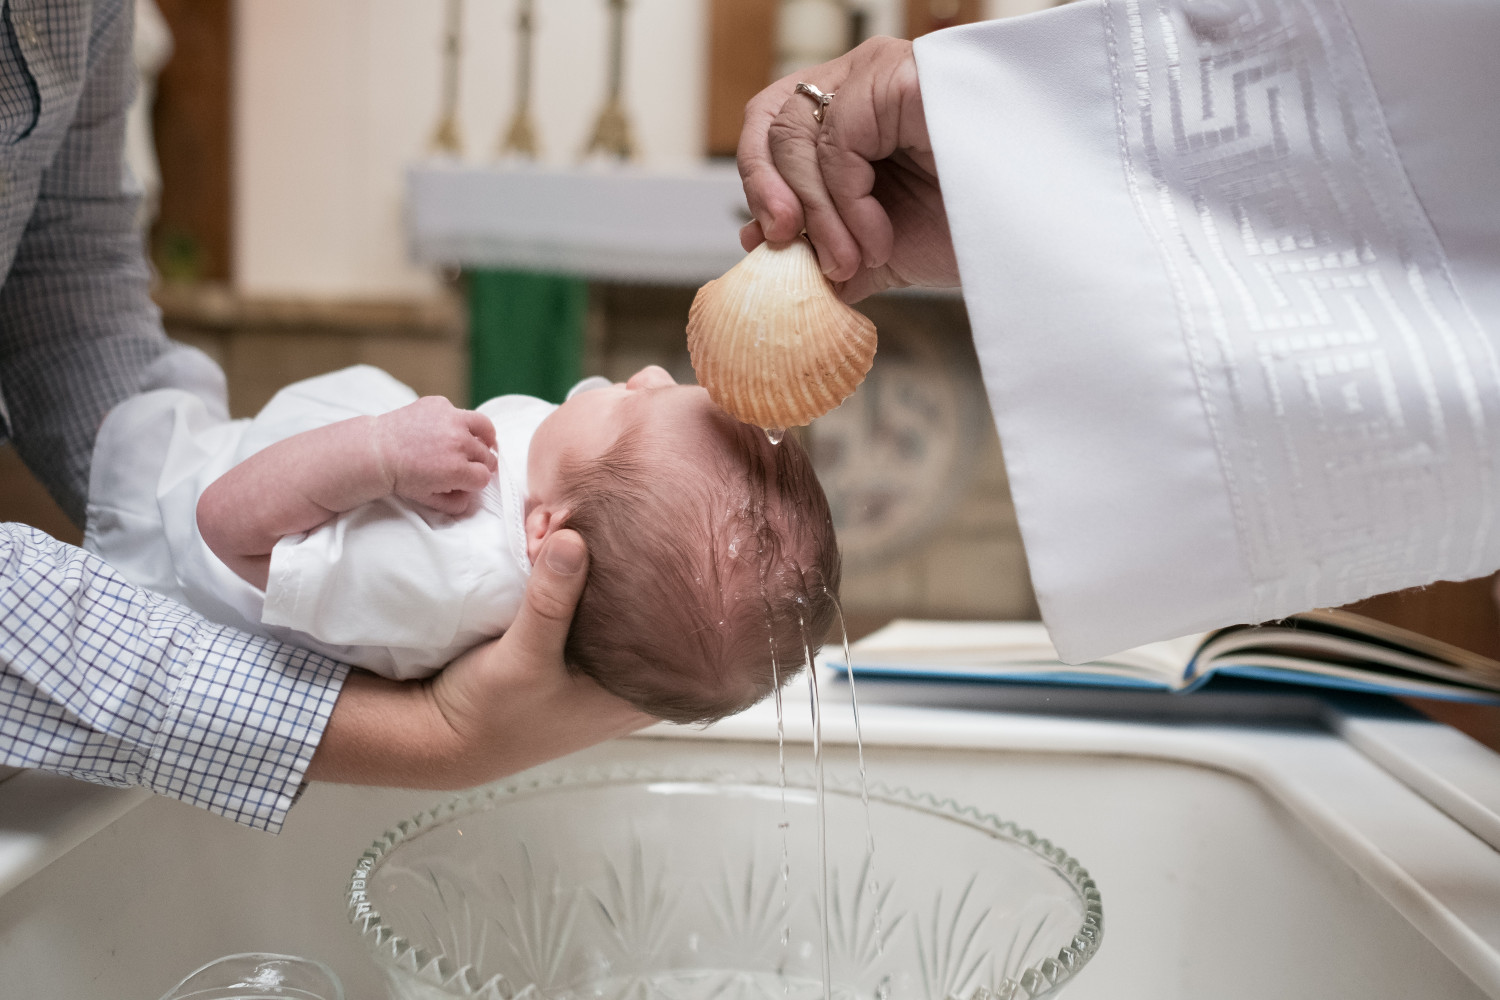 A baby being baptised